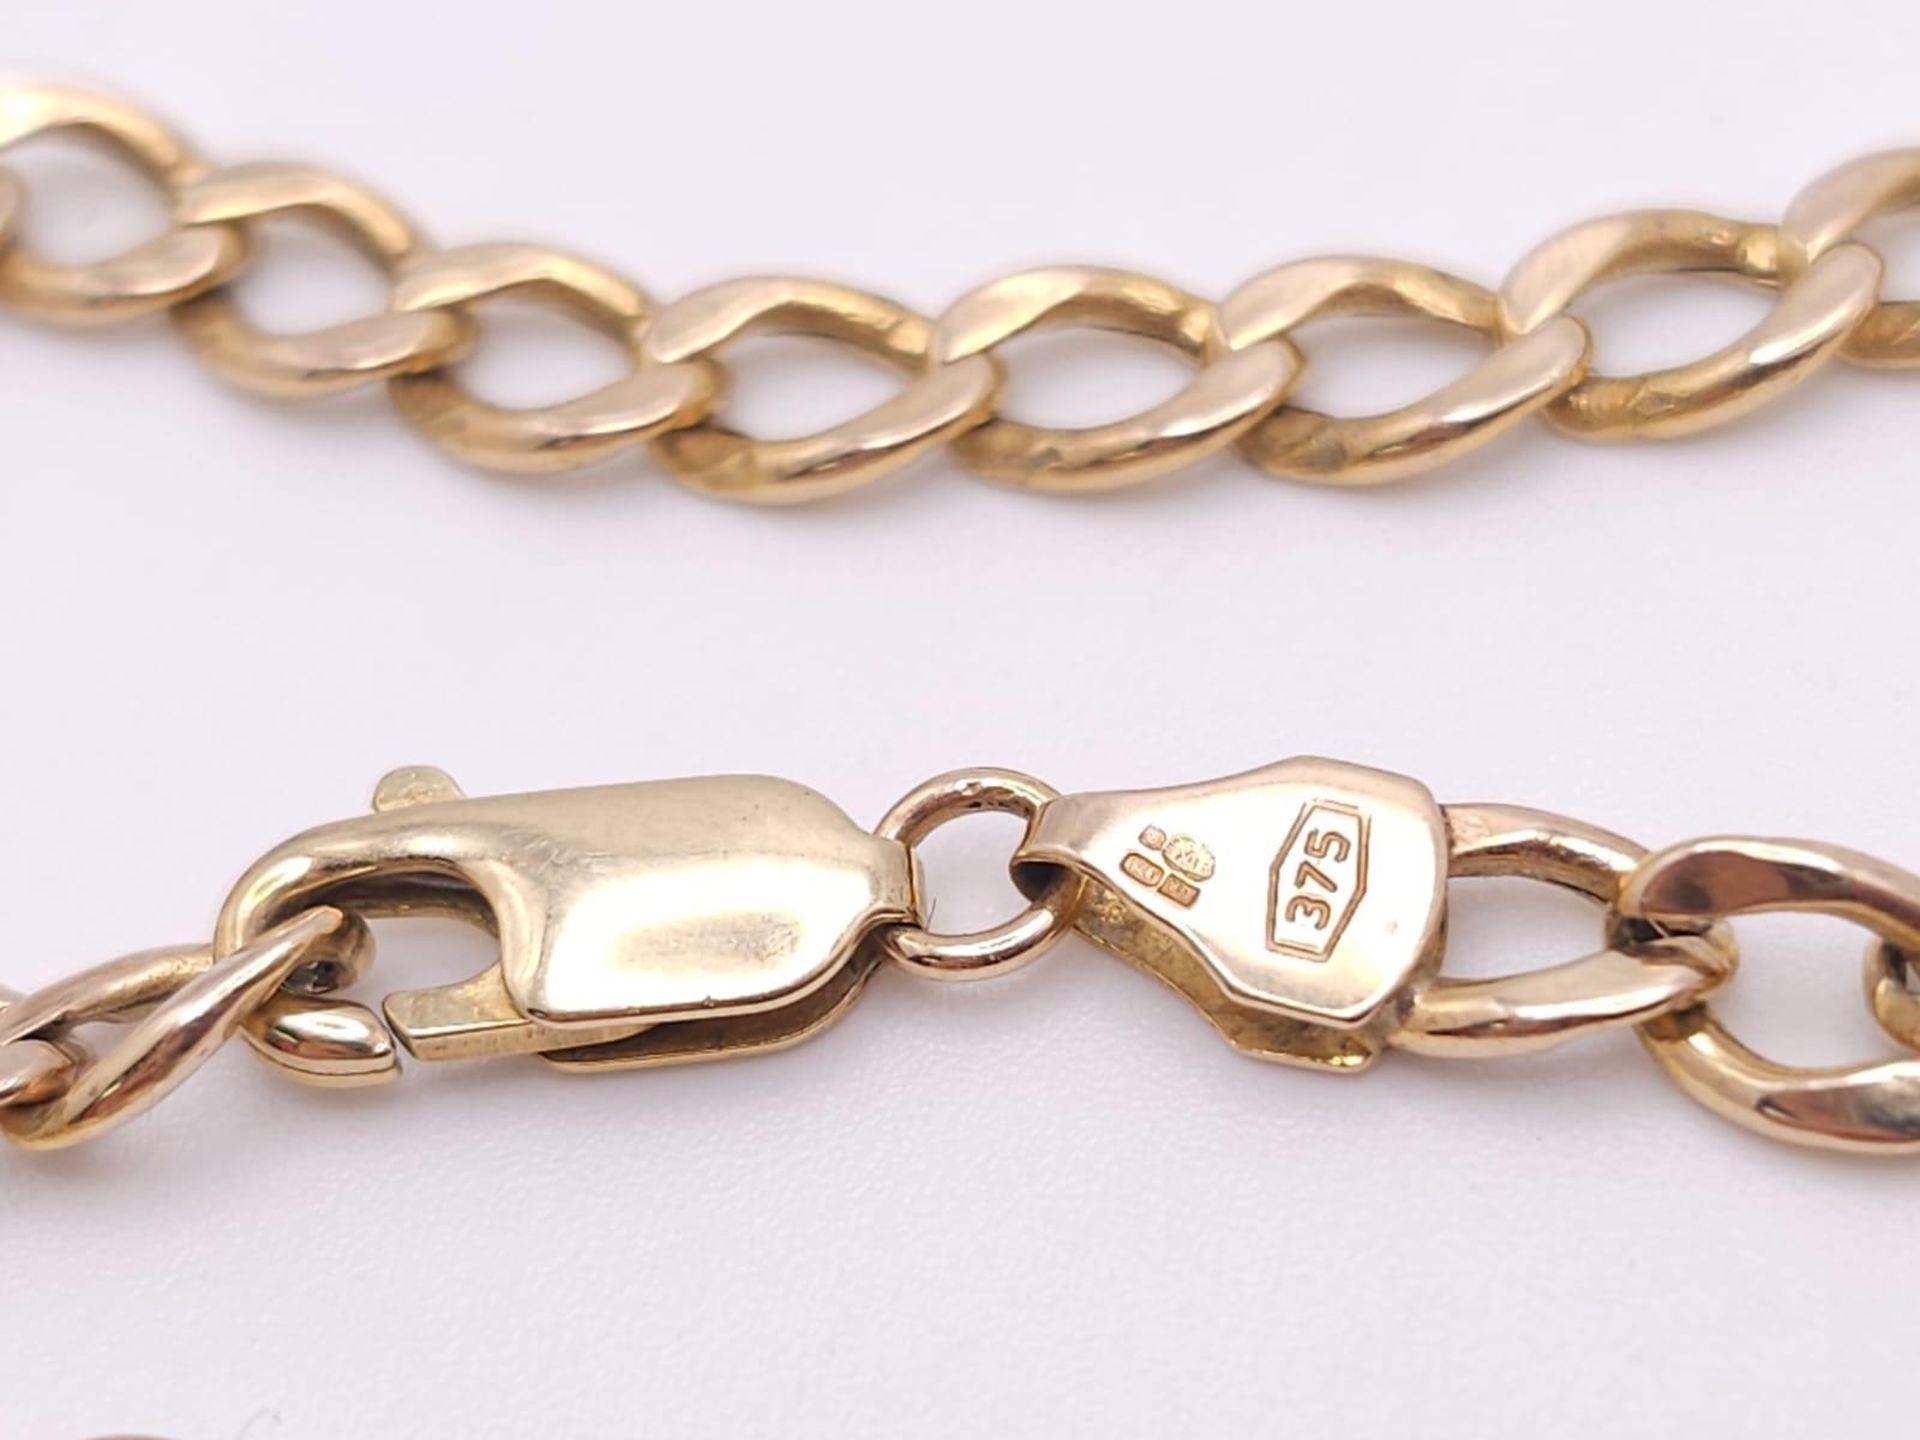 A 9K Yellow Gold Flat Curb Link Chain. 53cm length. 5.5g weight. - Image 4 of 5